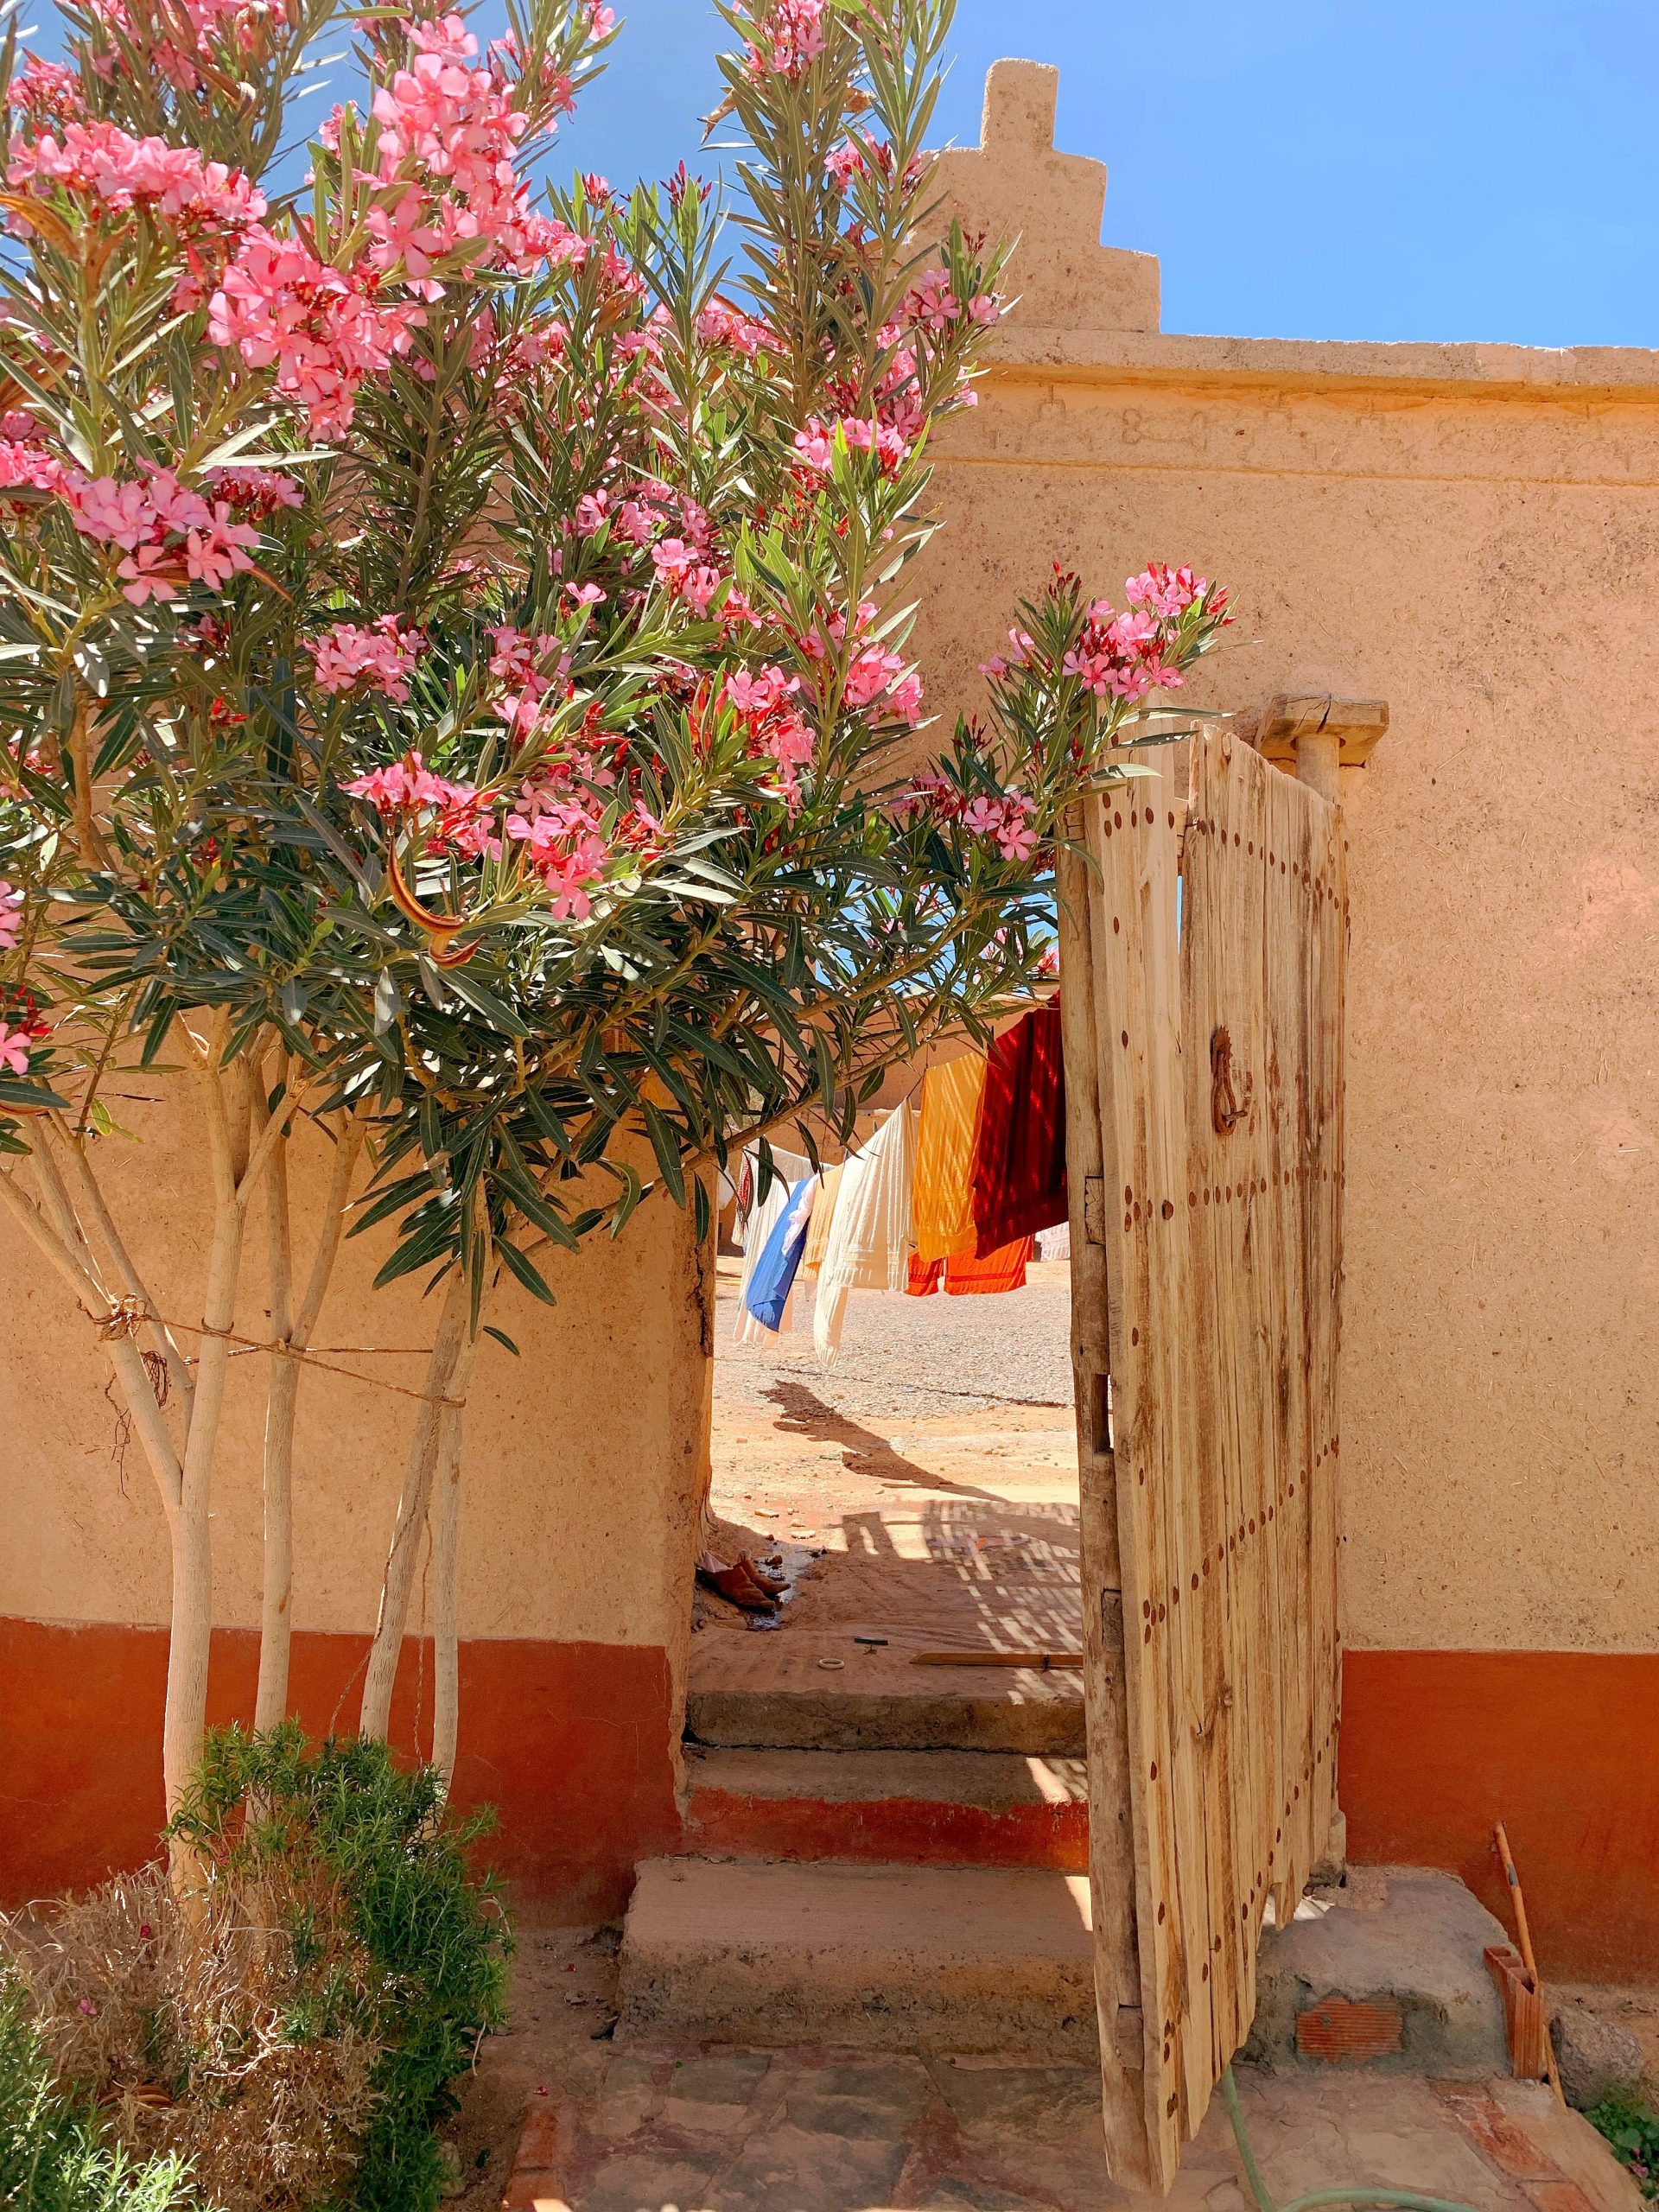 gallery image for 4 Day Cultural Tour Southeast Morocco